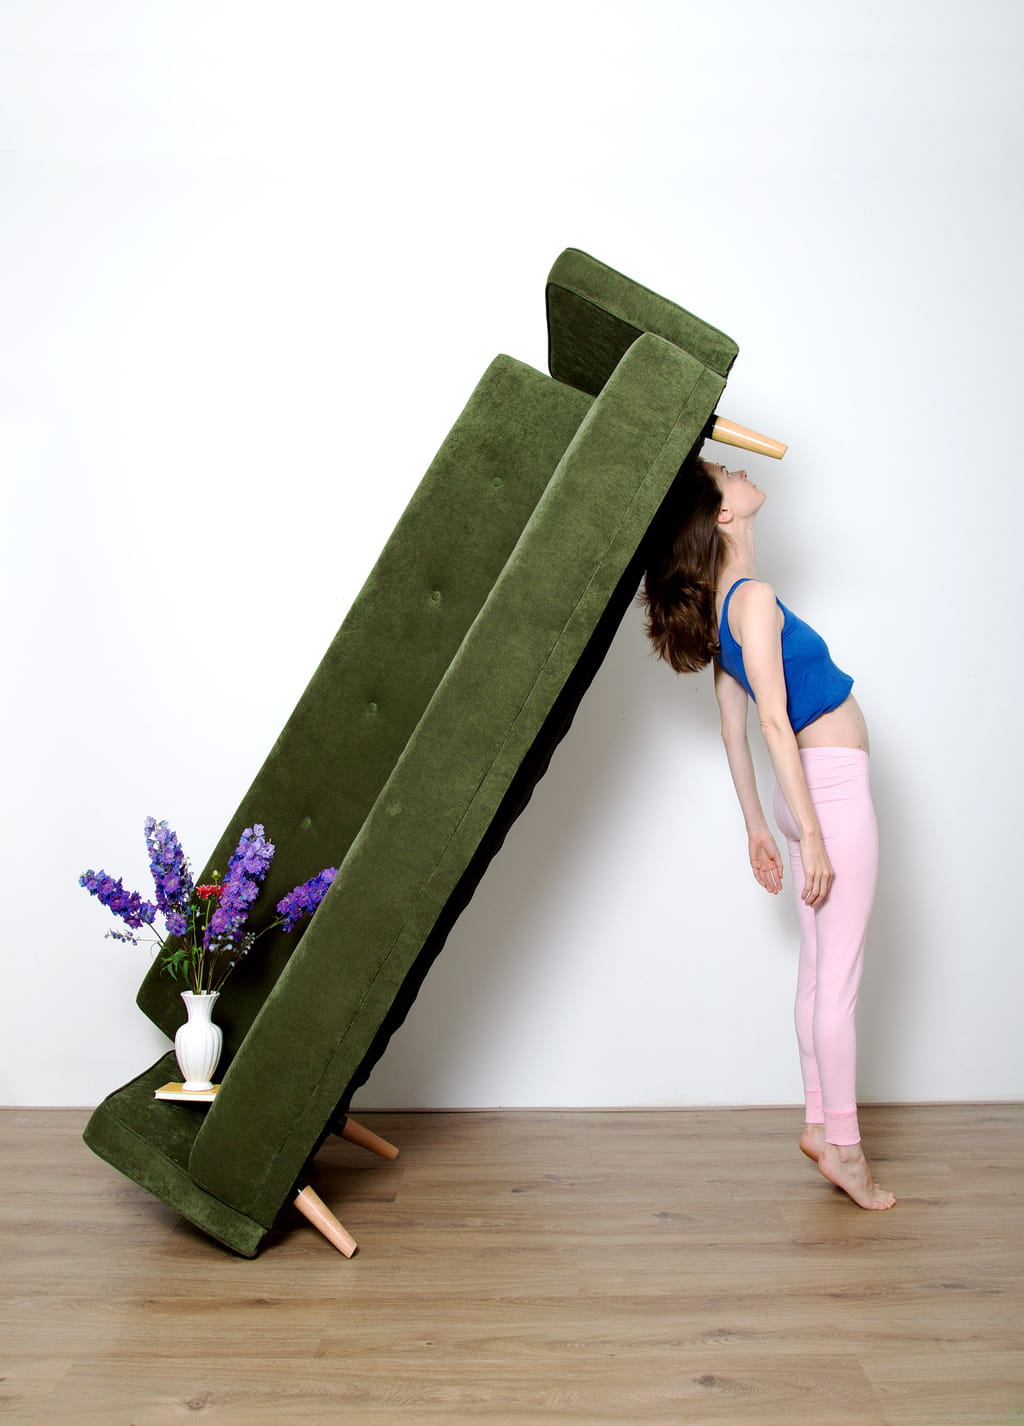 Picture of a female body uplifting a green velvet couch on the side. On the couch there is a flower composition